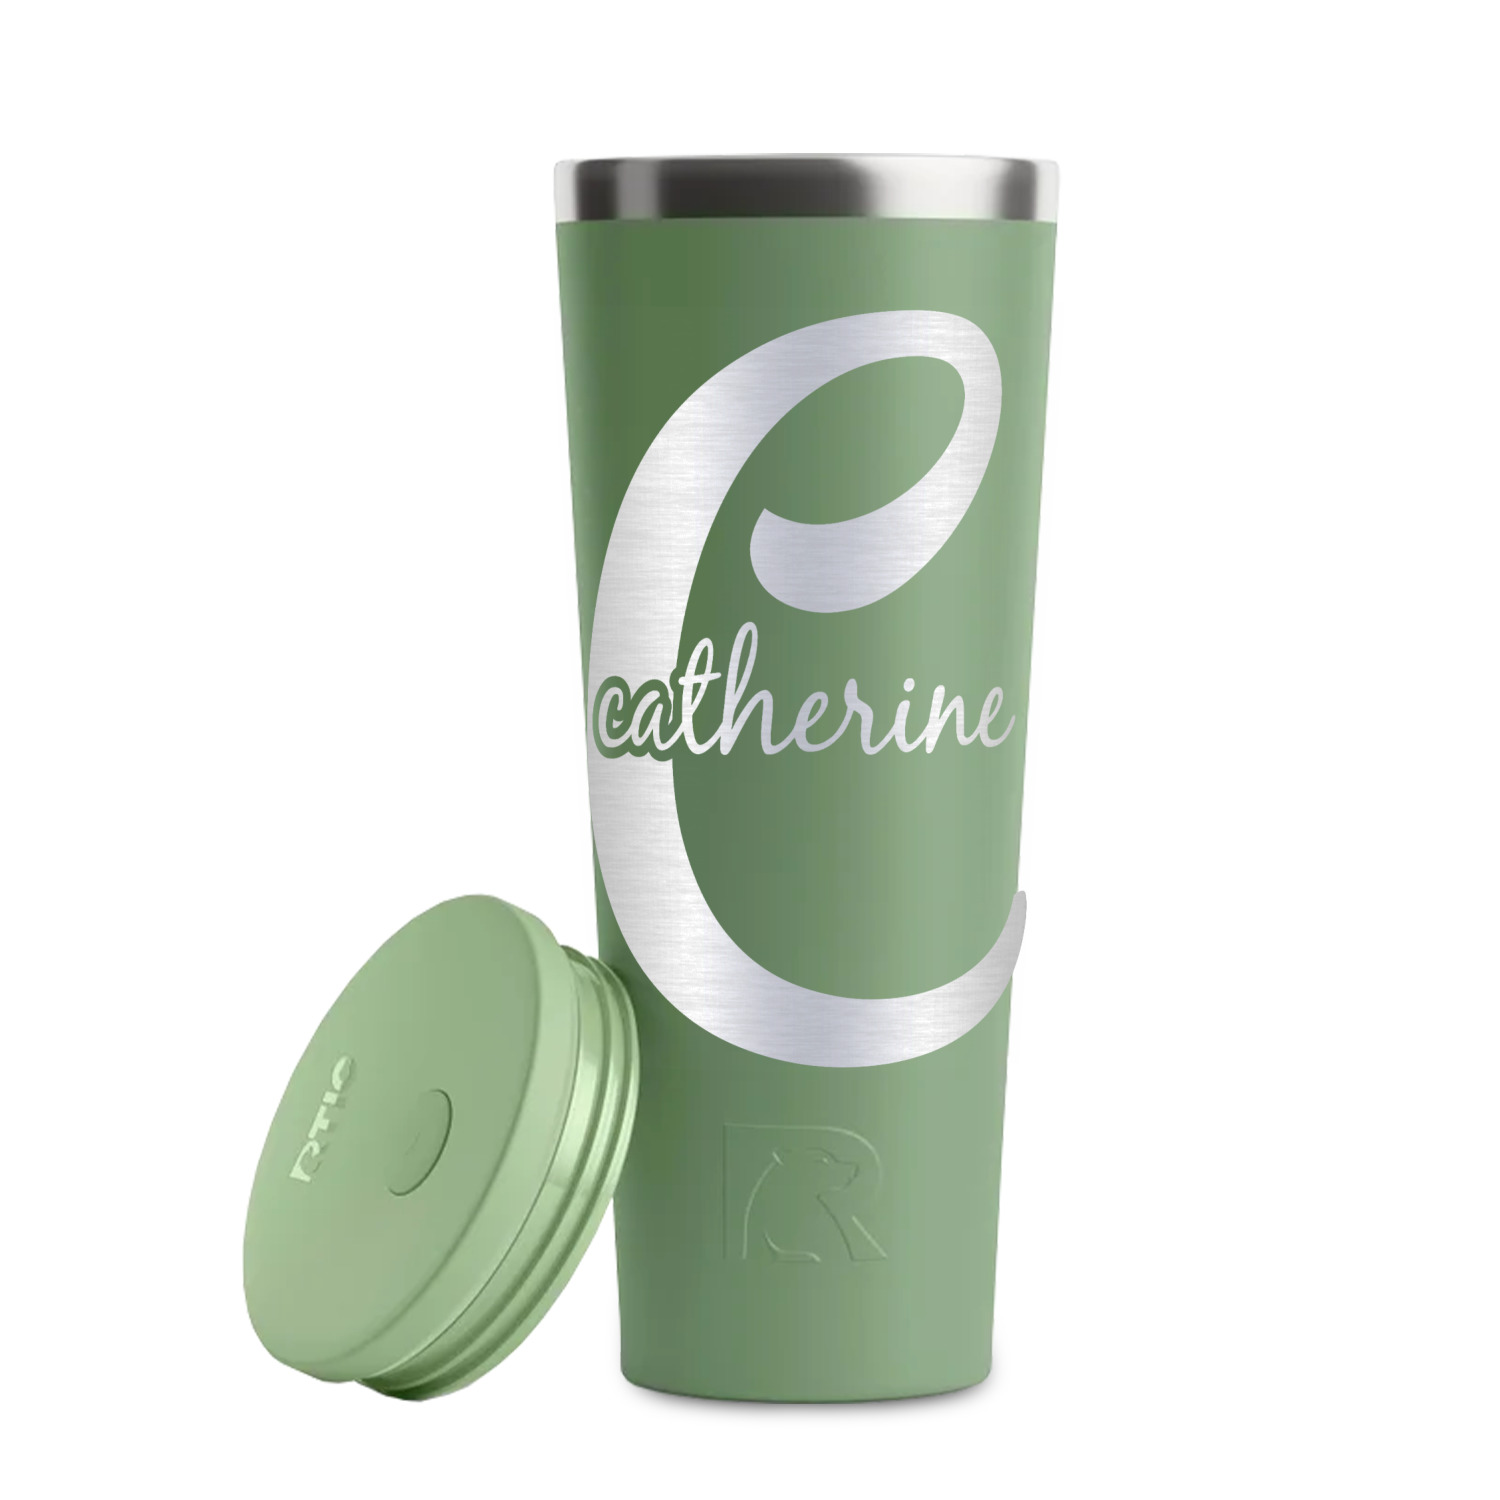 https://www.youcustomizeit.com/common/MAKE/837763/Name-Initial-Girly-Light-Green-RTIC-Everyday-Tumbler-28-oz-Lid-Off.jpg?lm=1698259143